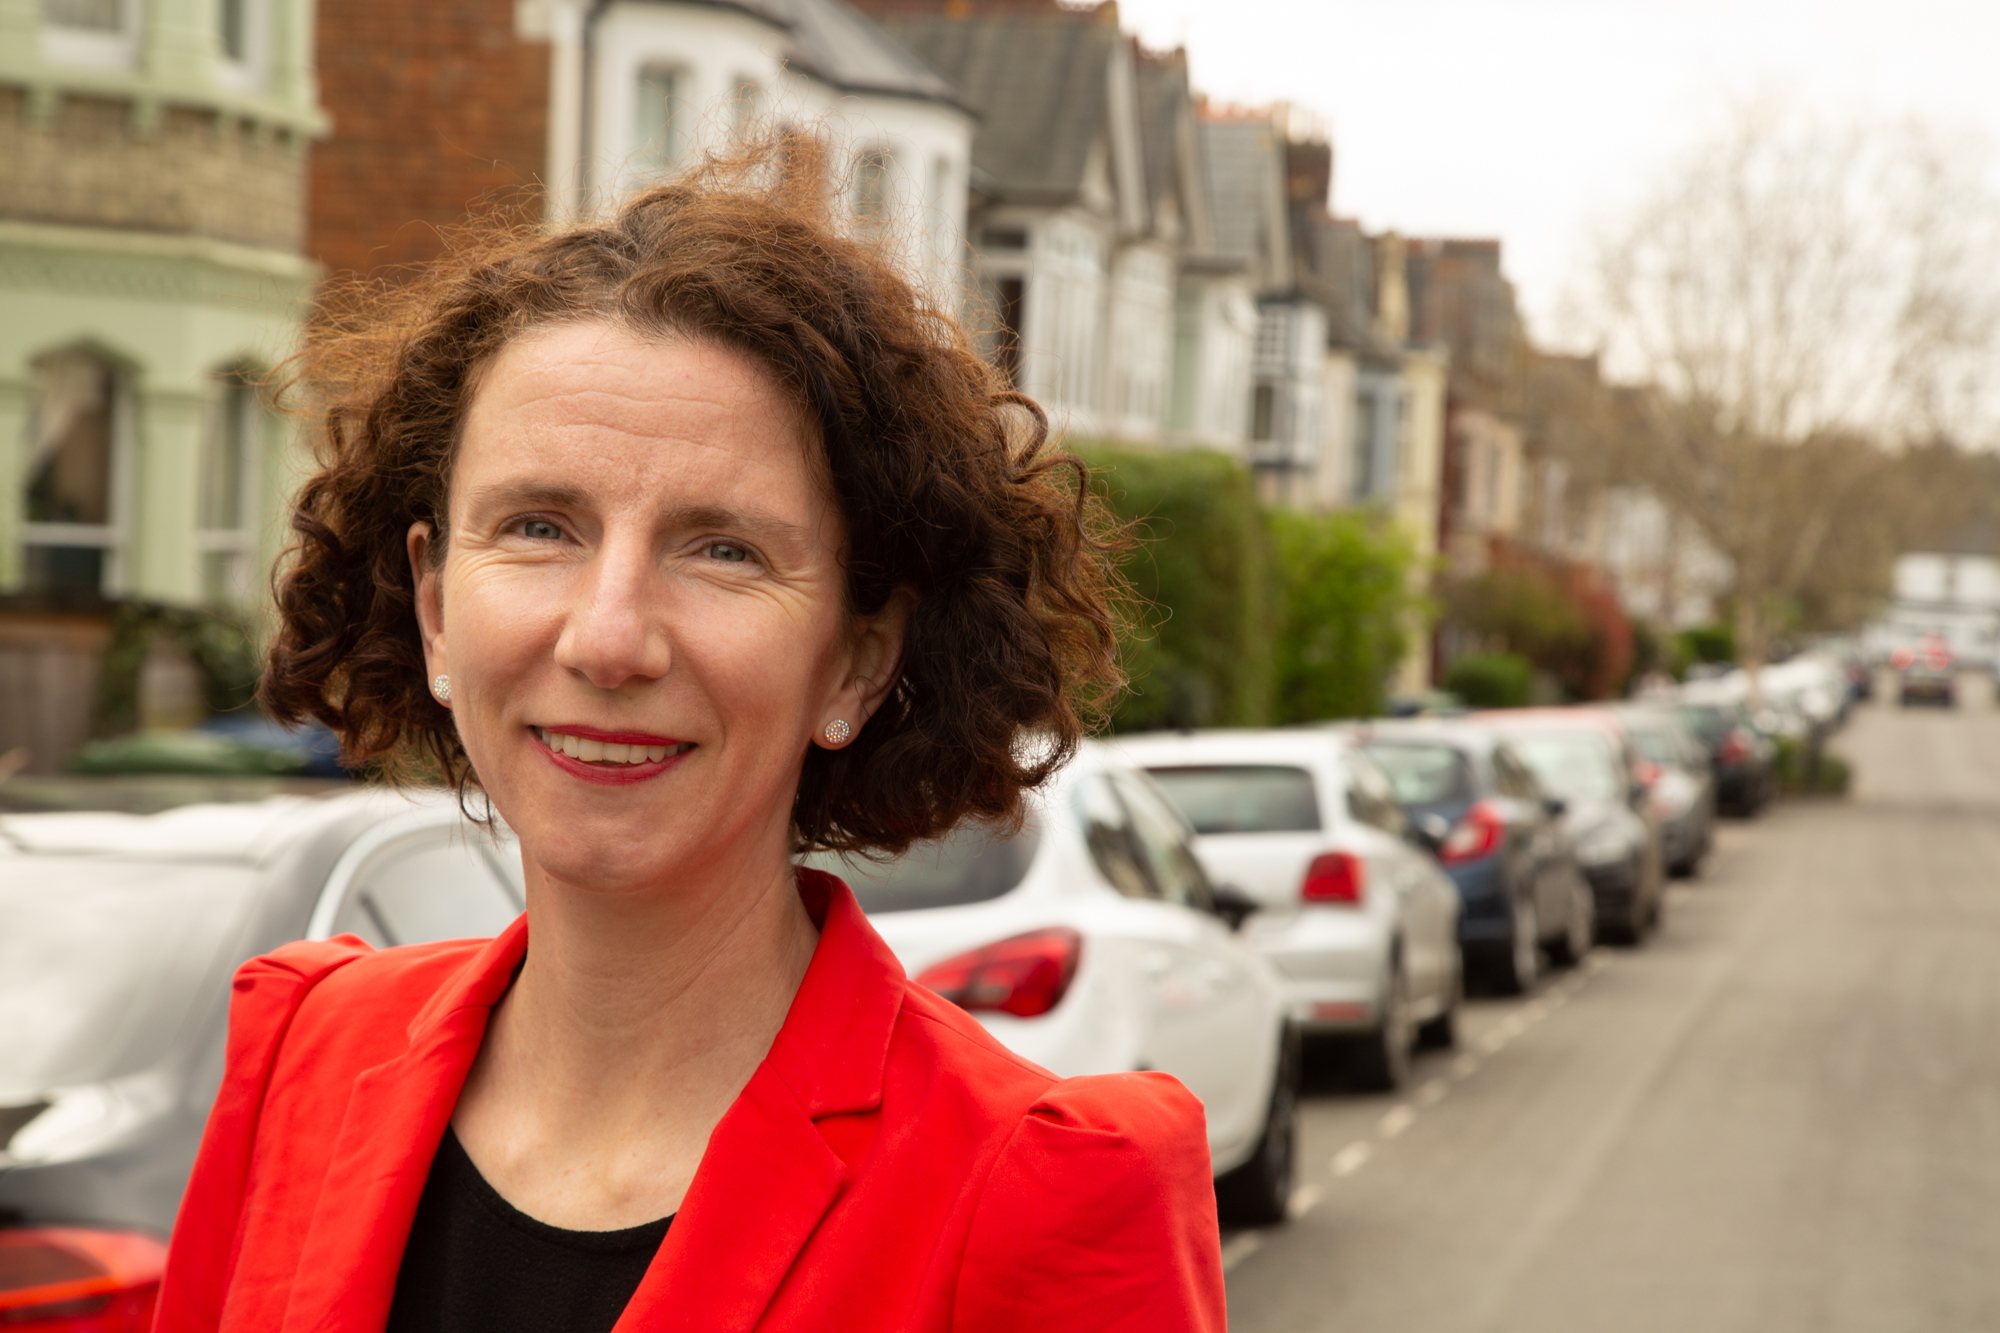 Anneliese Dodds MP has tough words for Rishi Sunak and Michael Gove